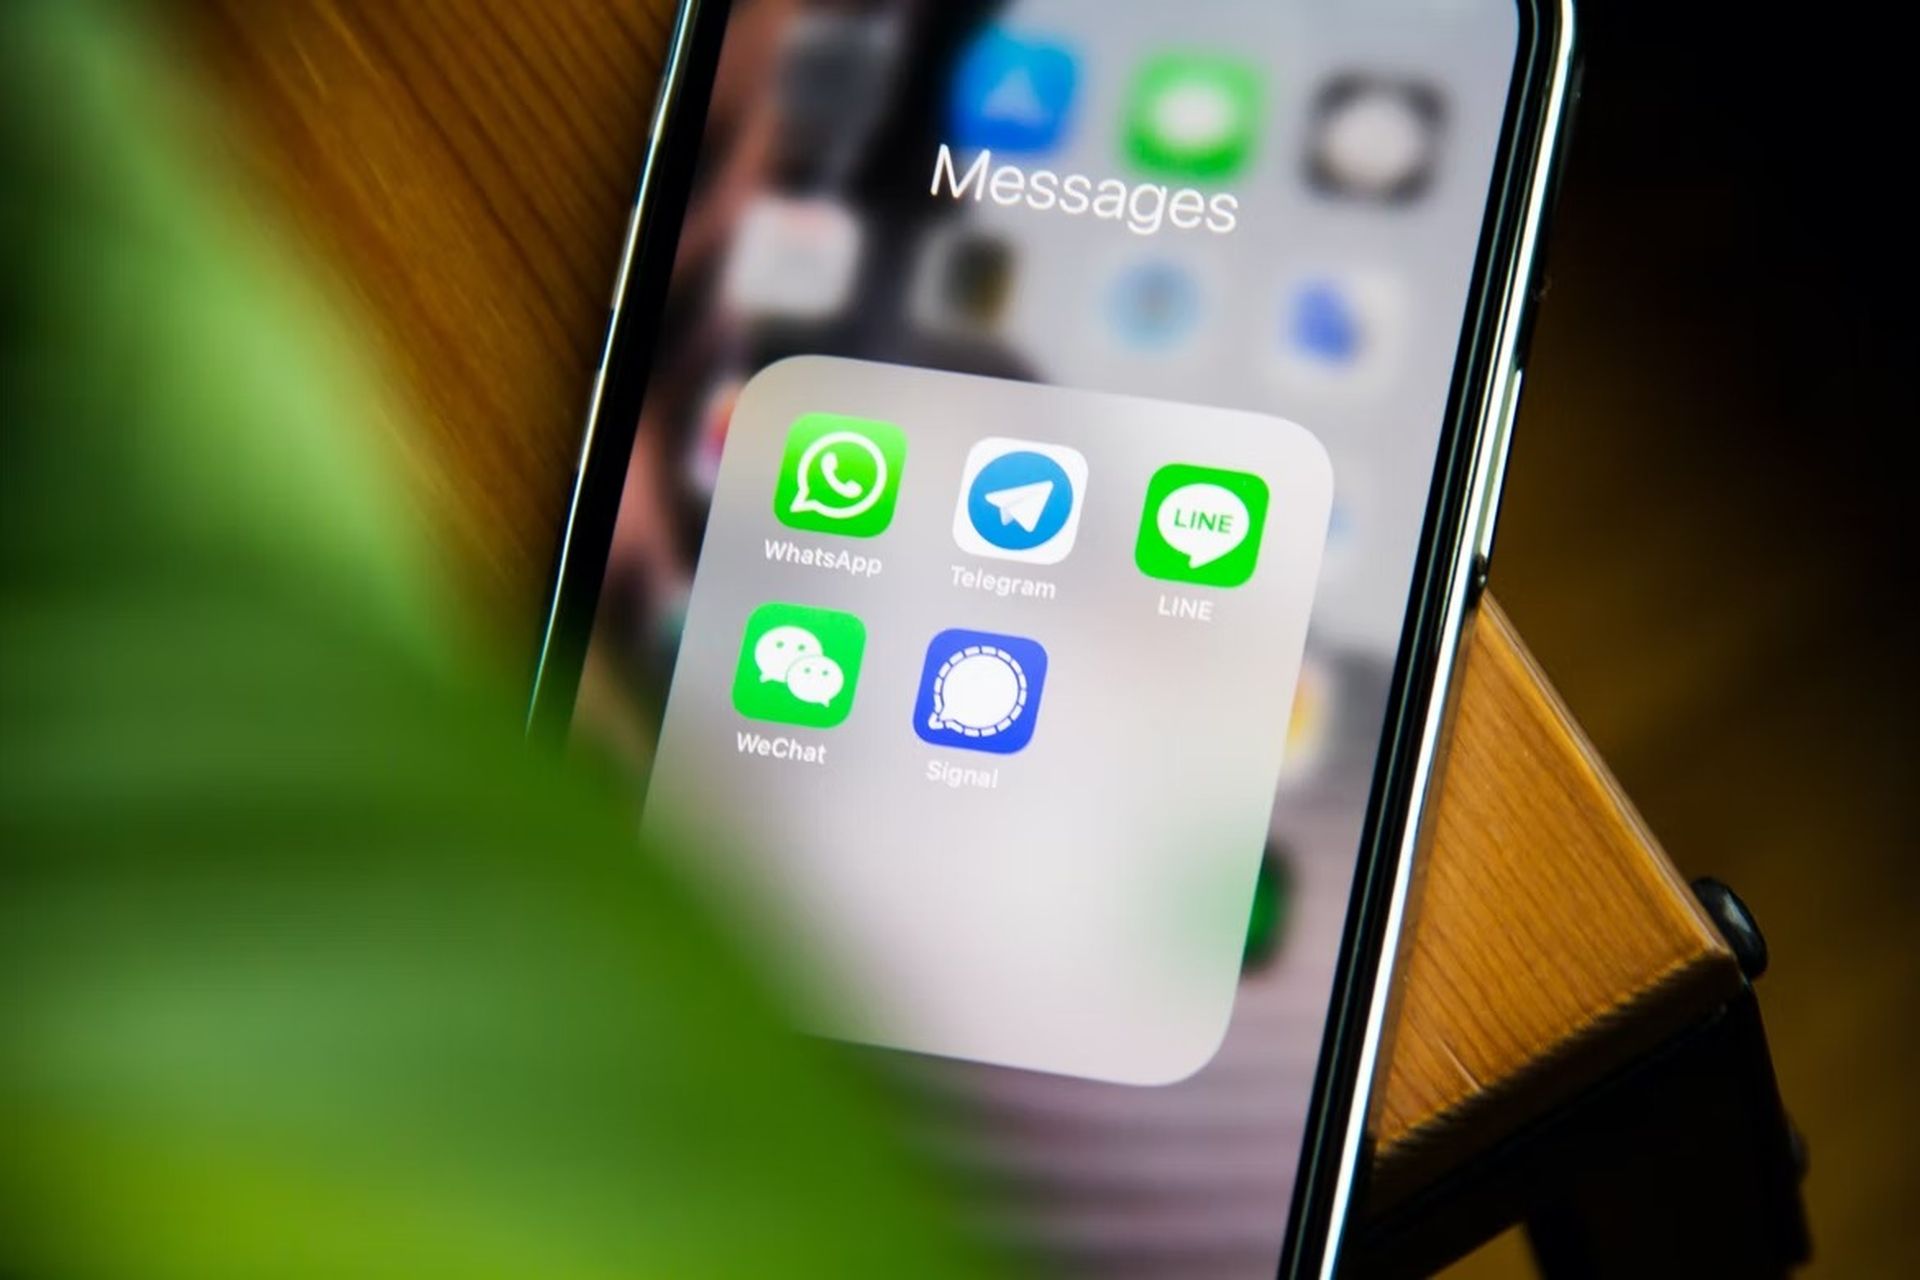 WhatsApp will end support for iOS 10 and iOS 11 by the end of 2022. A new warning discovered by WABetaInfo encourages iPhone users to upgrade their software to continue using WhatsApp after October 24th.